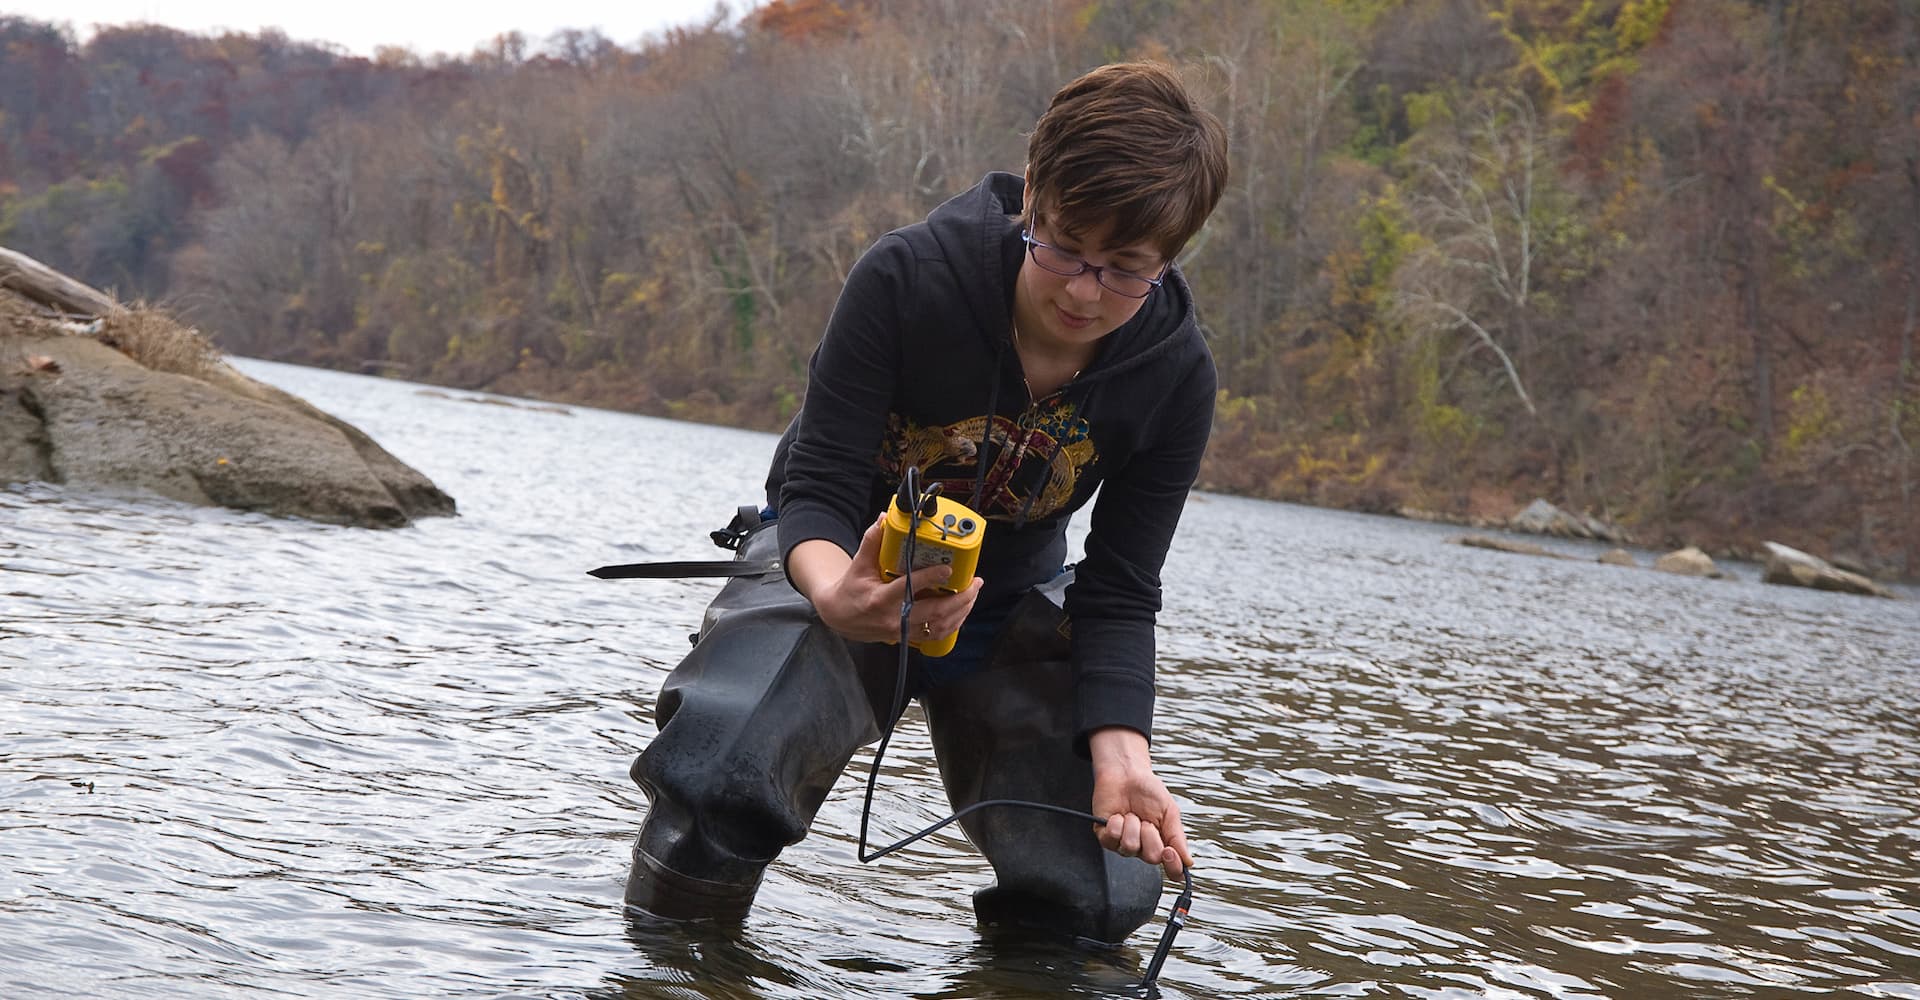 Student works on river water testing during experiential learning